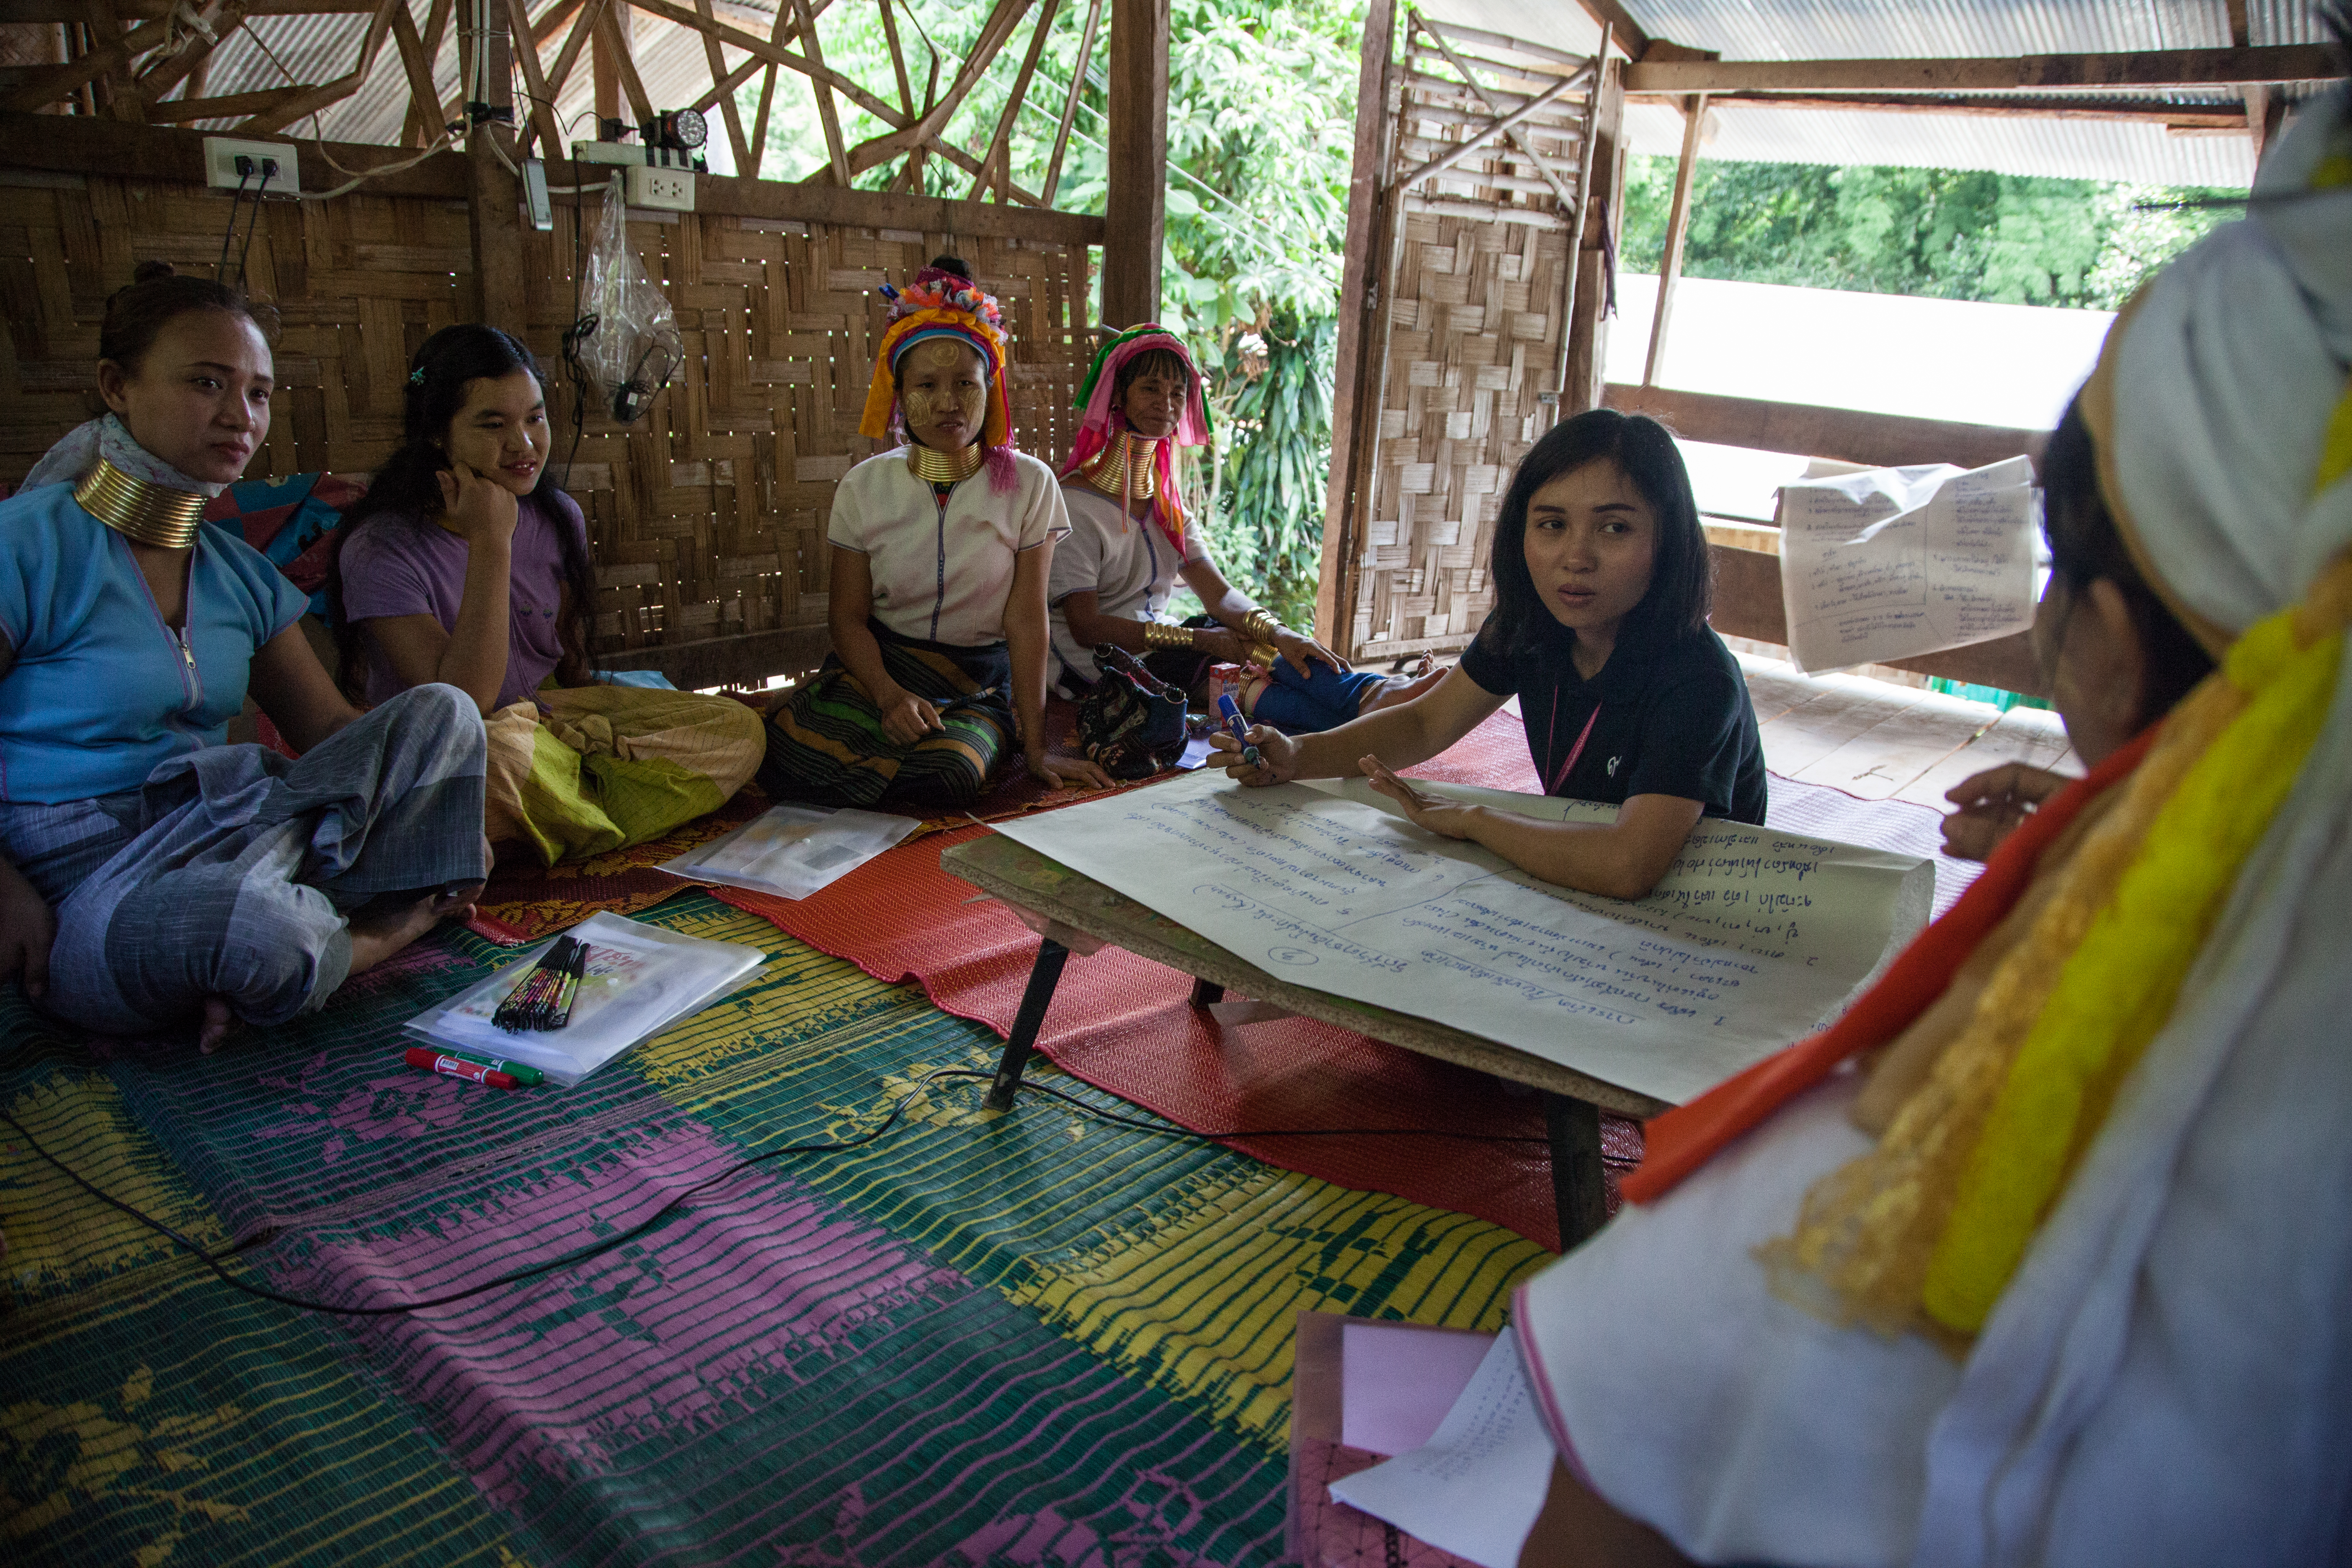 Women at Huai Sua Tao gather in a communal bamboo house for a meeting with province officials who came to gather information about their culture for educational purposes.